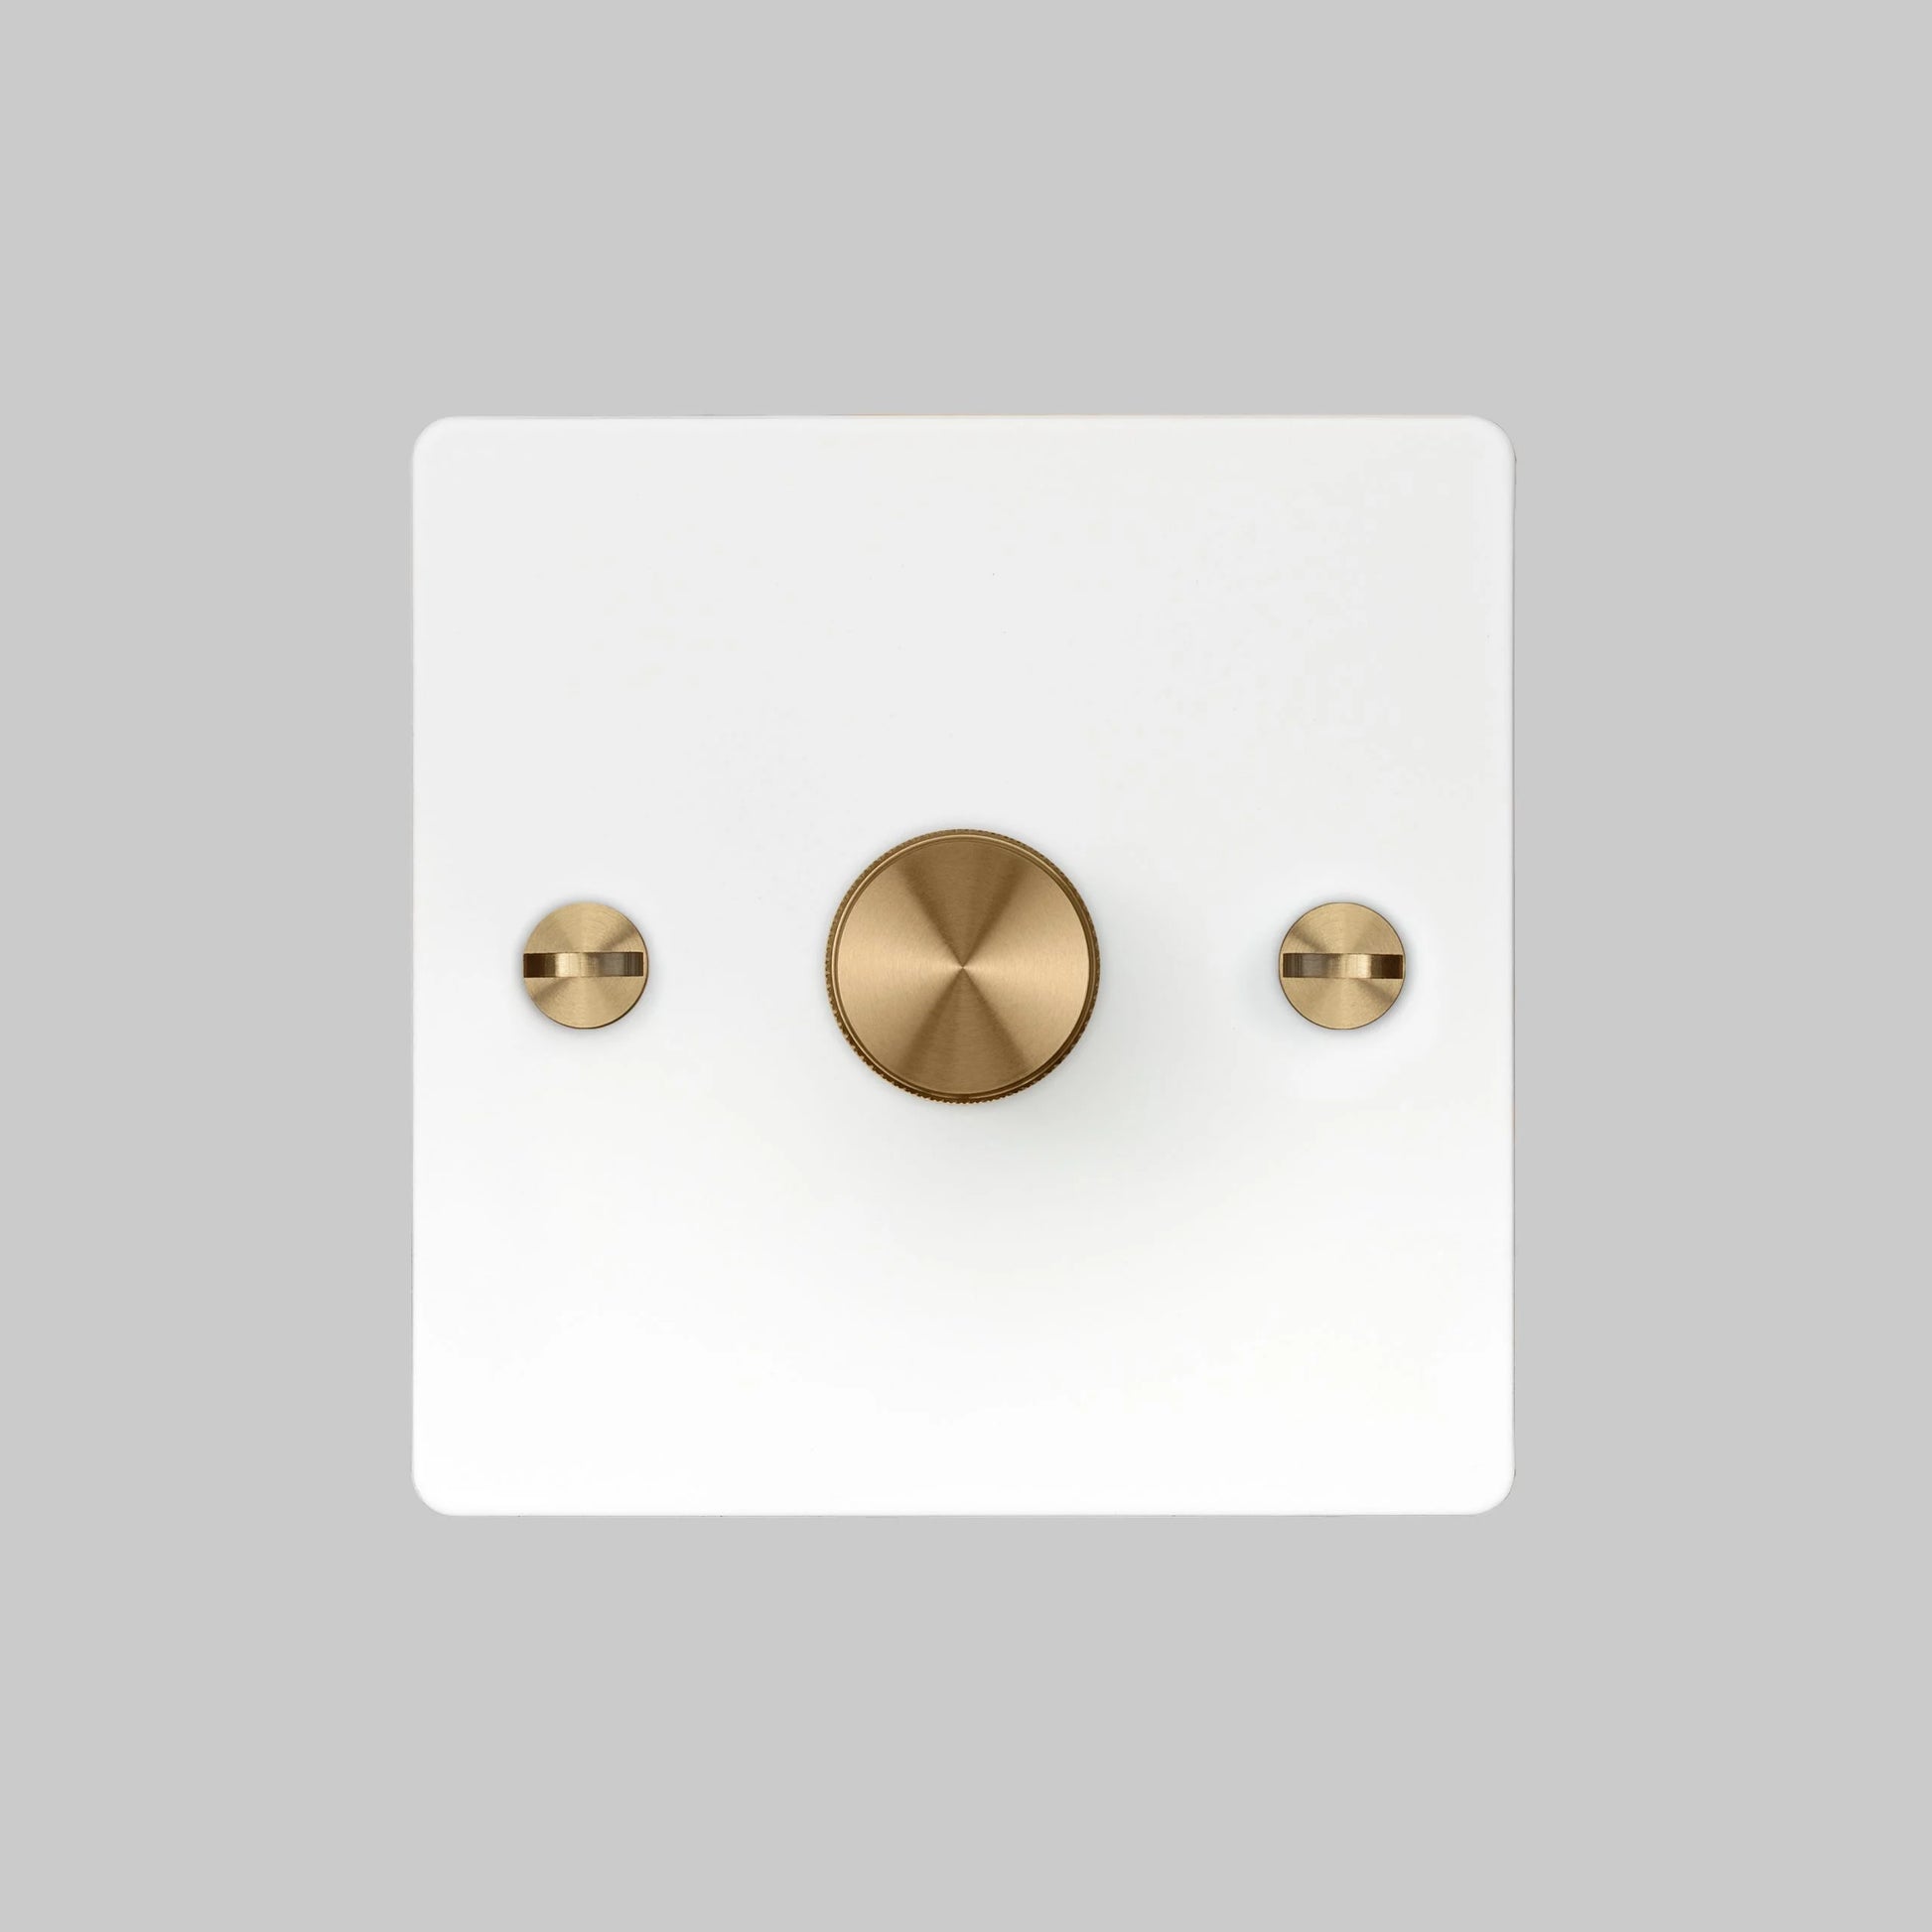 1G Dimmer/ 120W/ White with Brass details, front view.